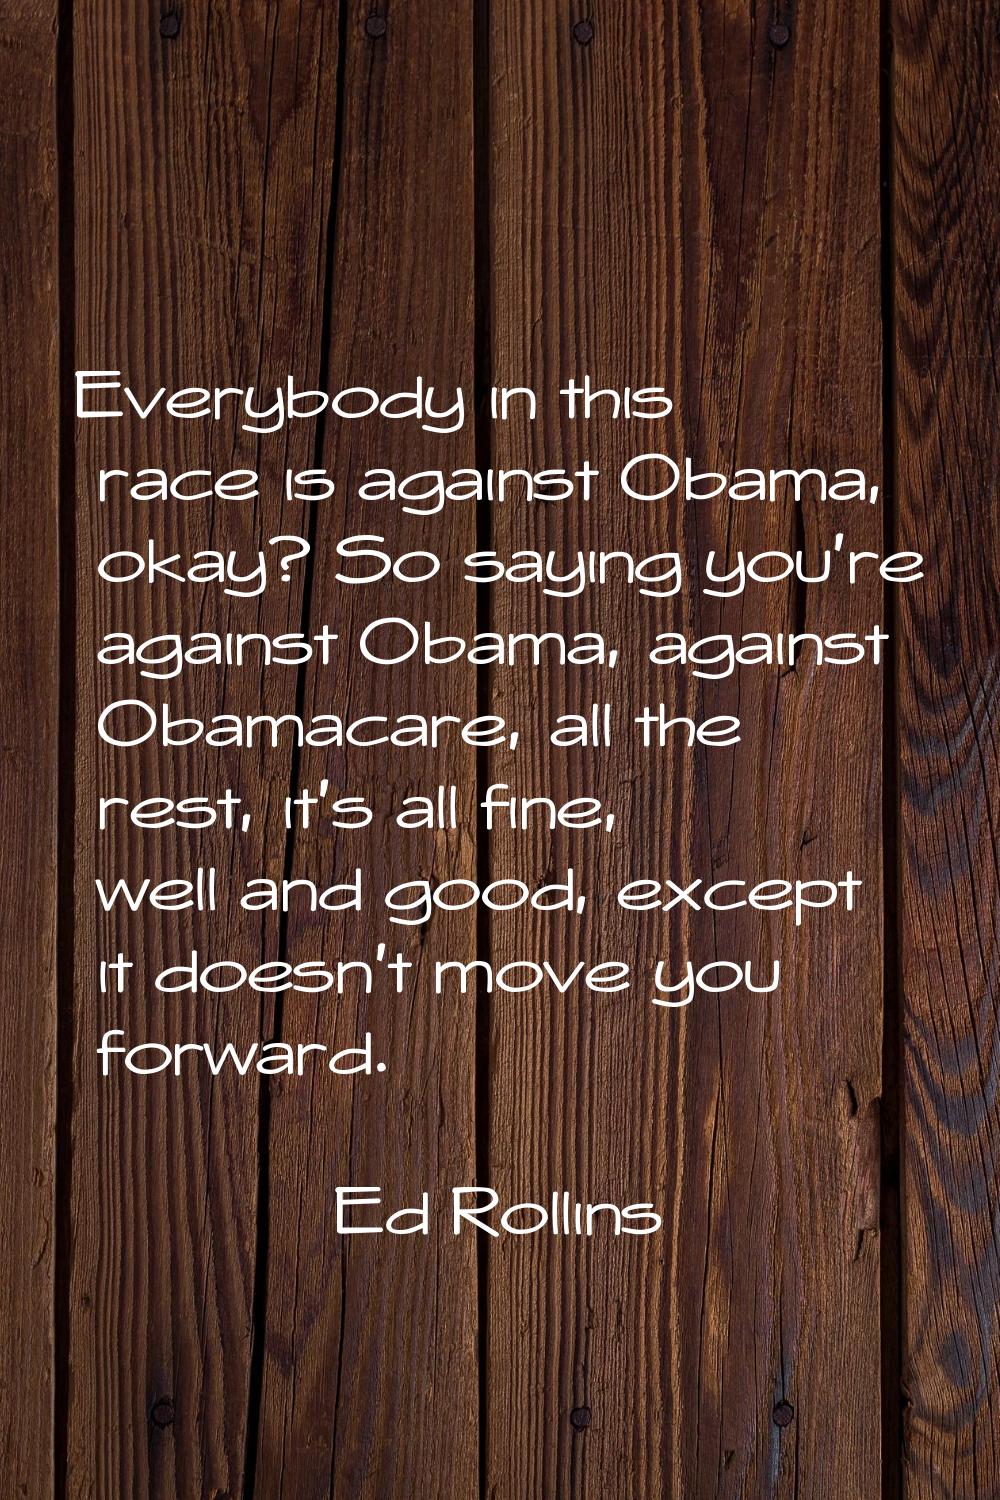 Everybody in this race is against Obama, okay? So saying you're against Obama, against Obamacare, a